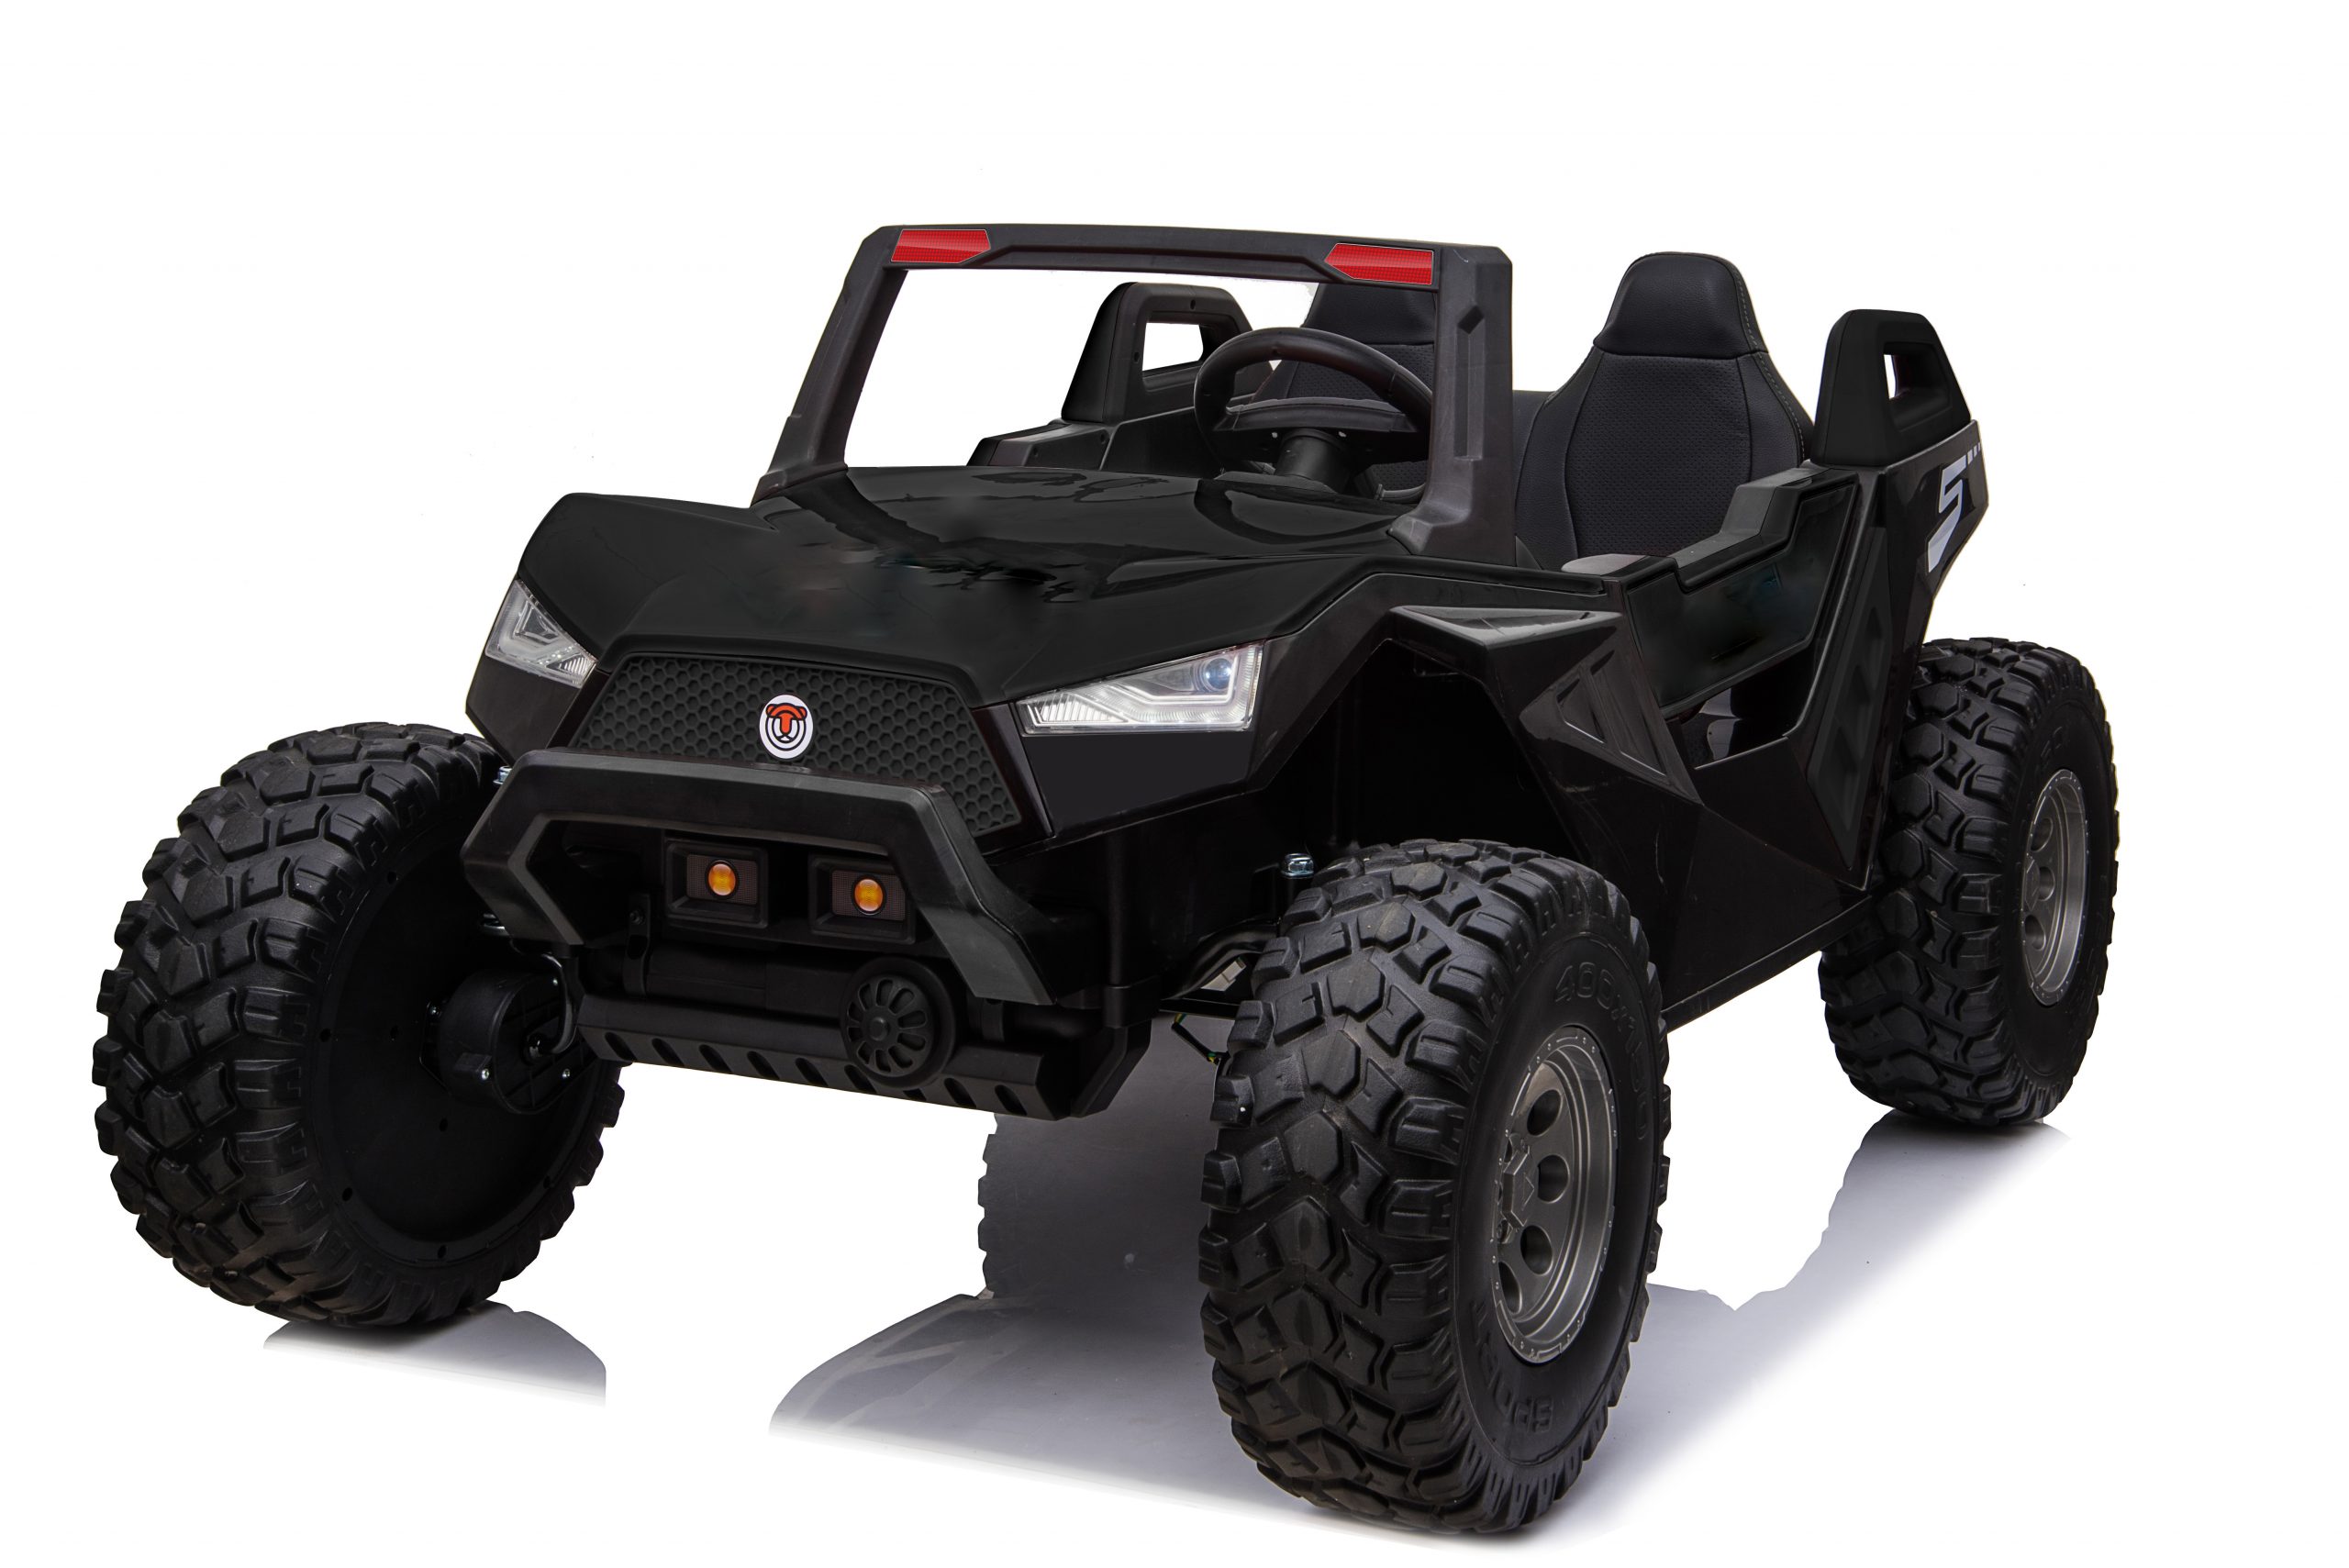 remote control dune buggy